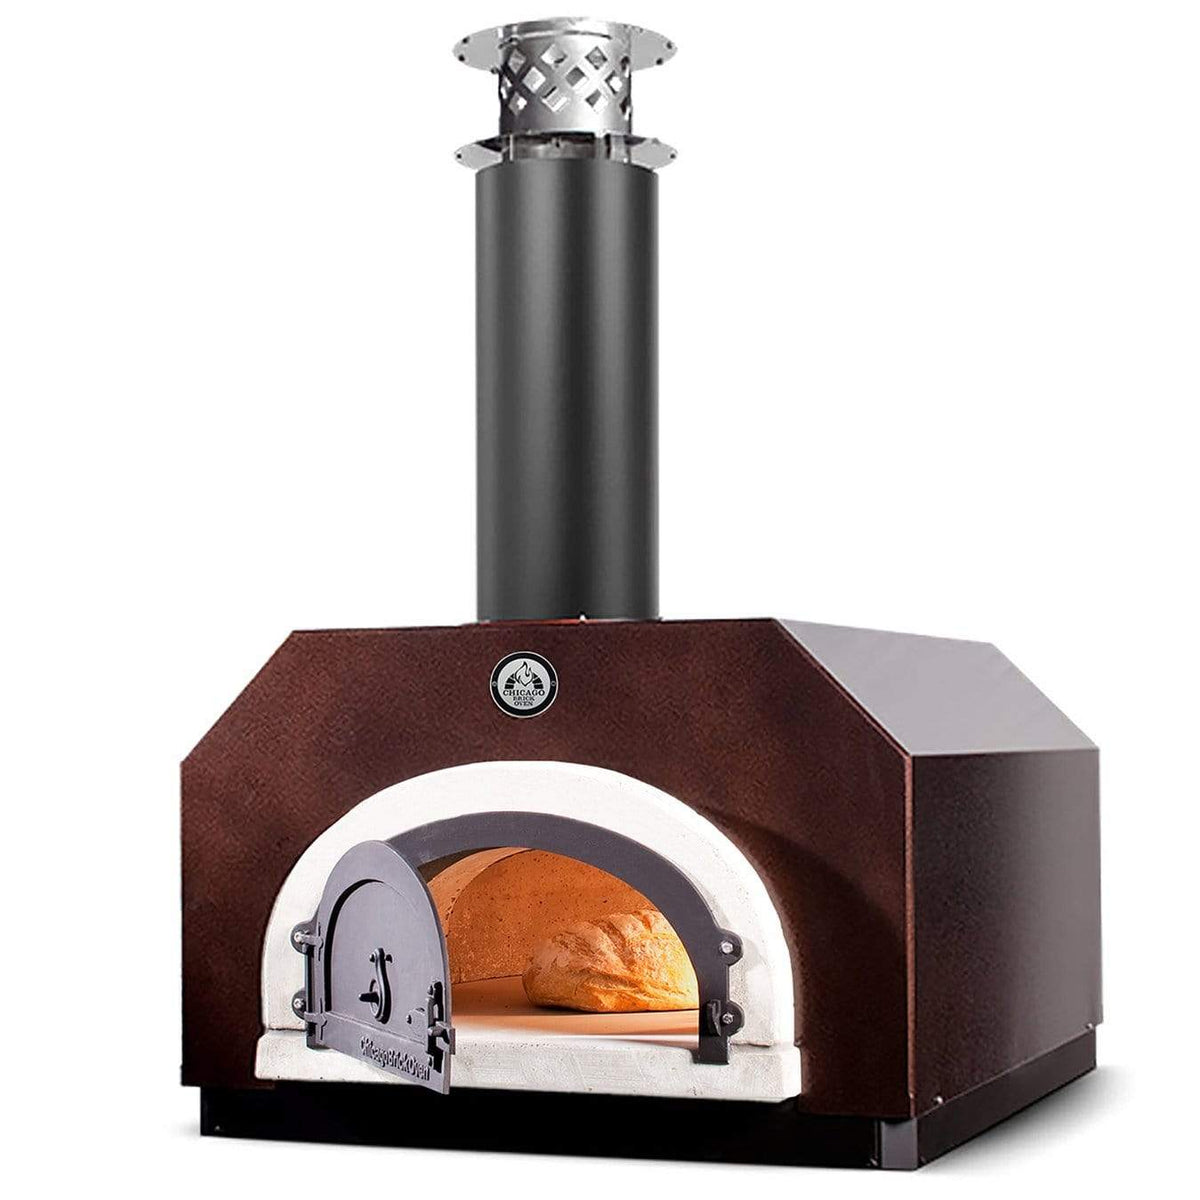 Chicago Brick Oven Pizza Ovens Copper Vein Chicago Brick Oven Wood Fired Pizza Oven / CBO-750 Countertop / 38&quot; X 28&quot; Cooking Surface / CBO-O-CT-750